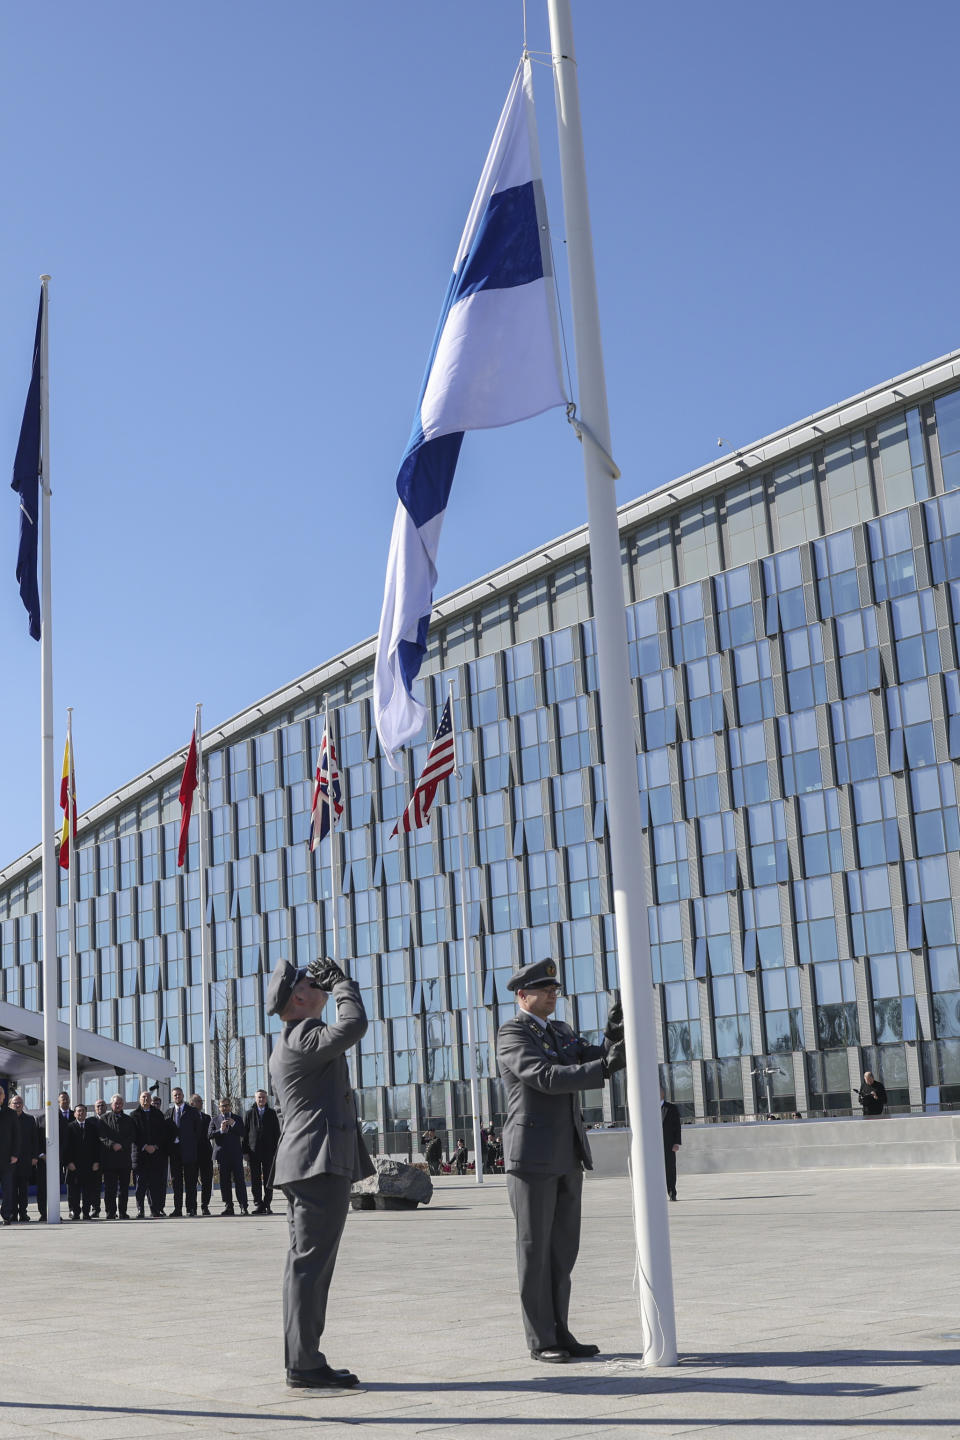 Military personnel raise the Finnish flag during a ceremony on the sidelines of a NATO foreign ministers meeting at NATO headquarters in Brussels, Tuesday, April 4, 2023. Finland joined the NATO military alliance on Tuesday, dealing a major blow to Russia with a historic realignment of the continent triggered by Moscow's invasion of Ukraine. (Johanna Geron, Pool Photo via AP)